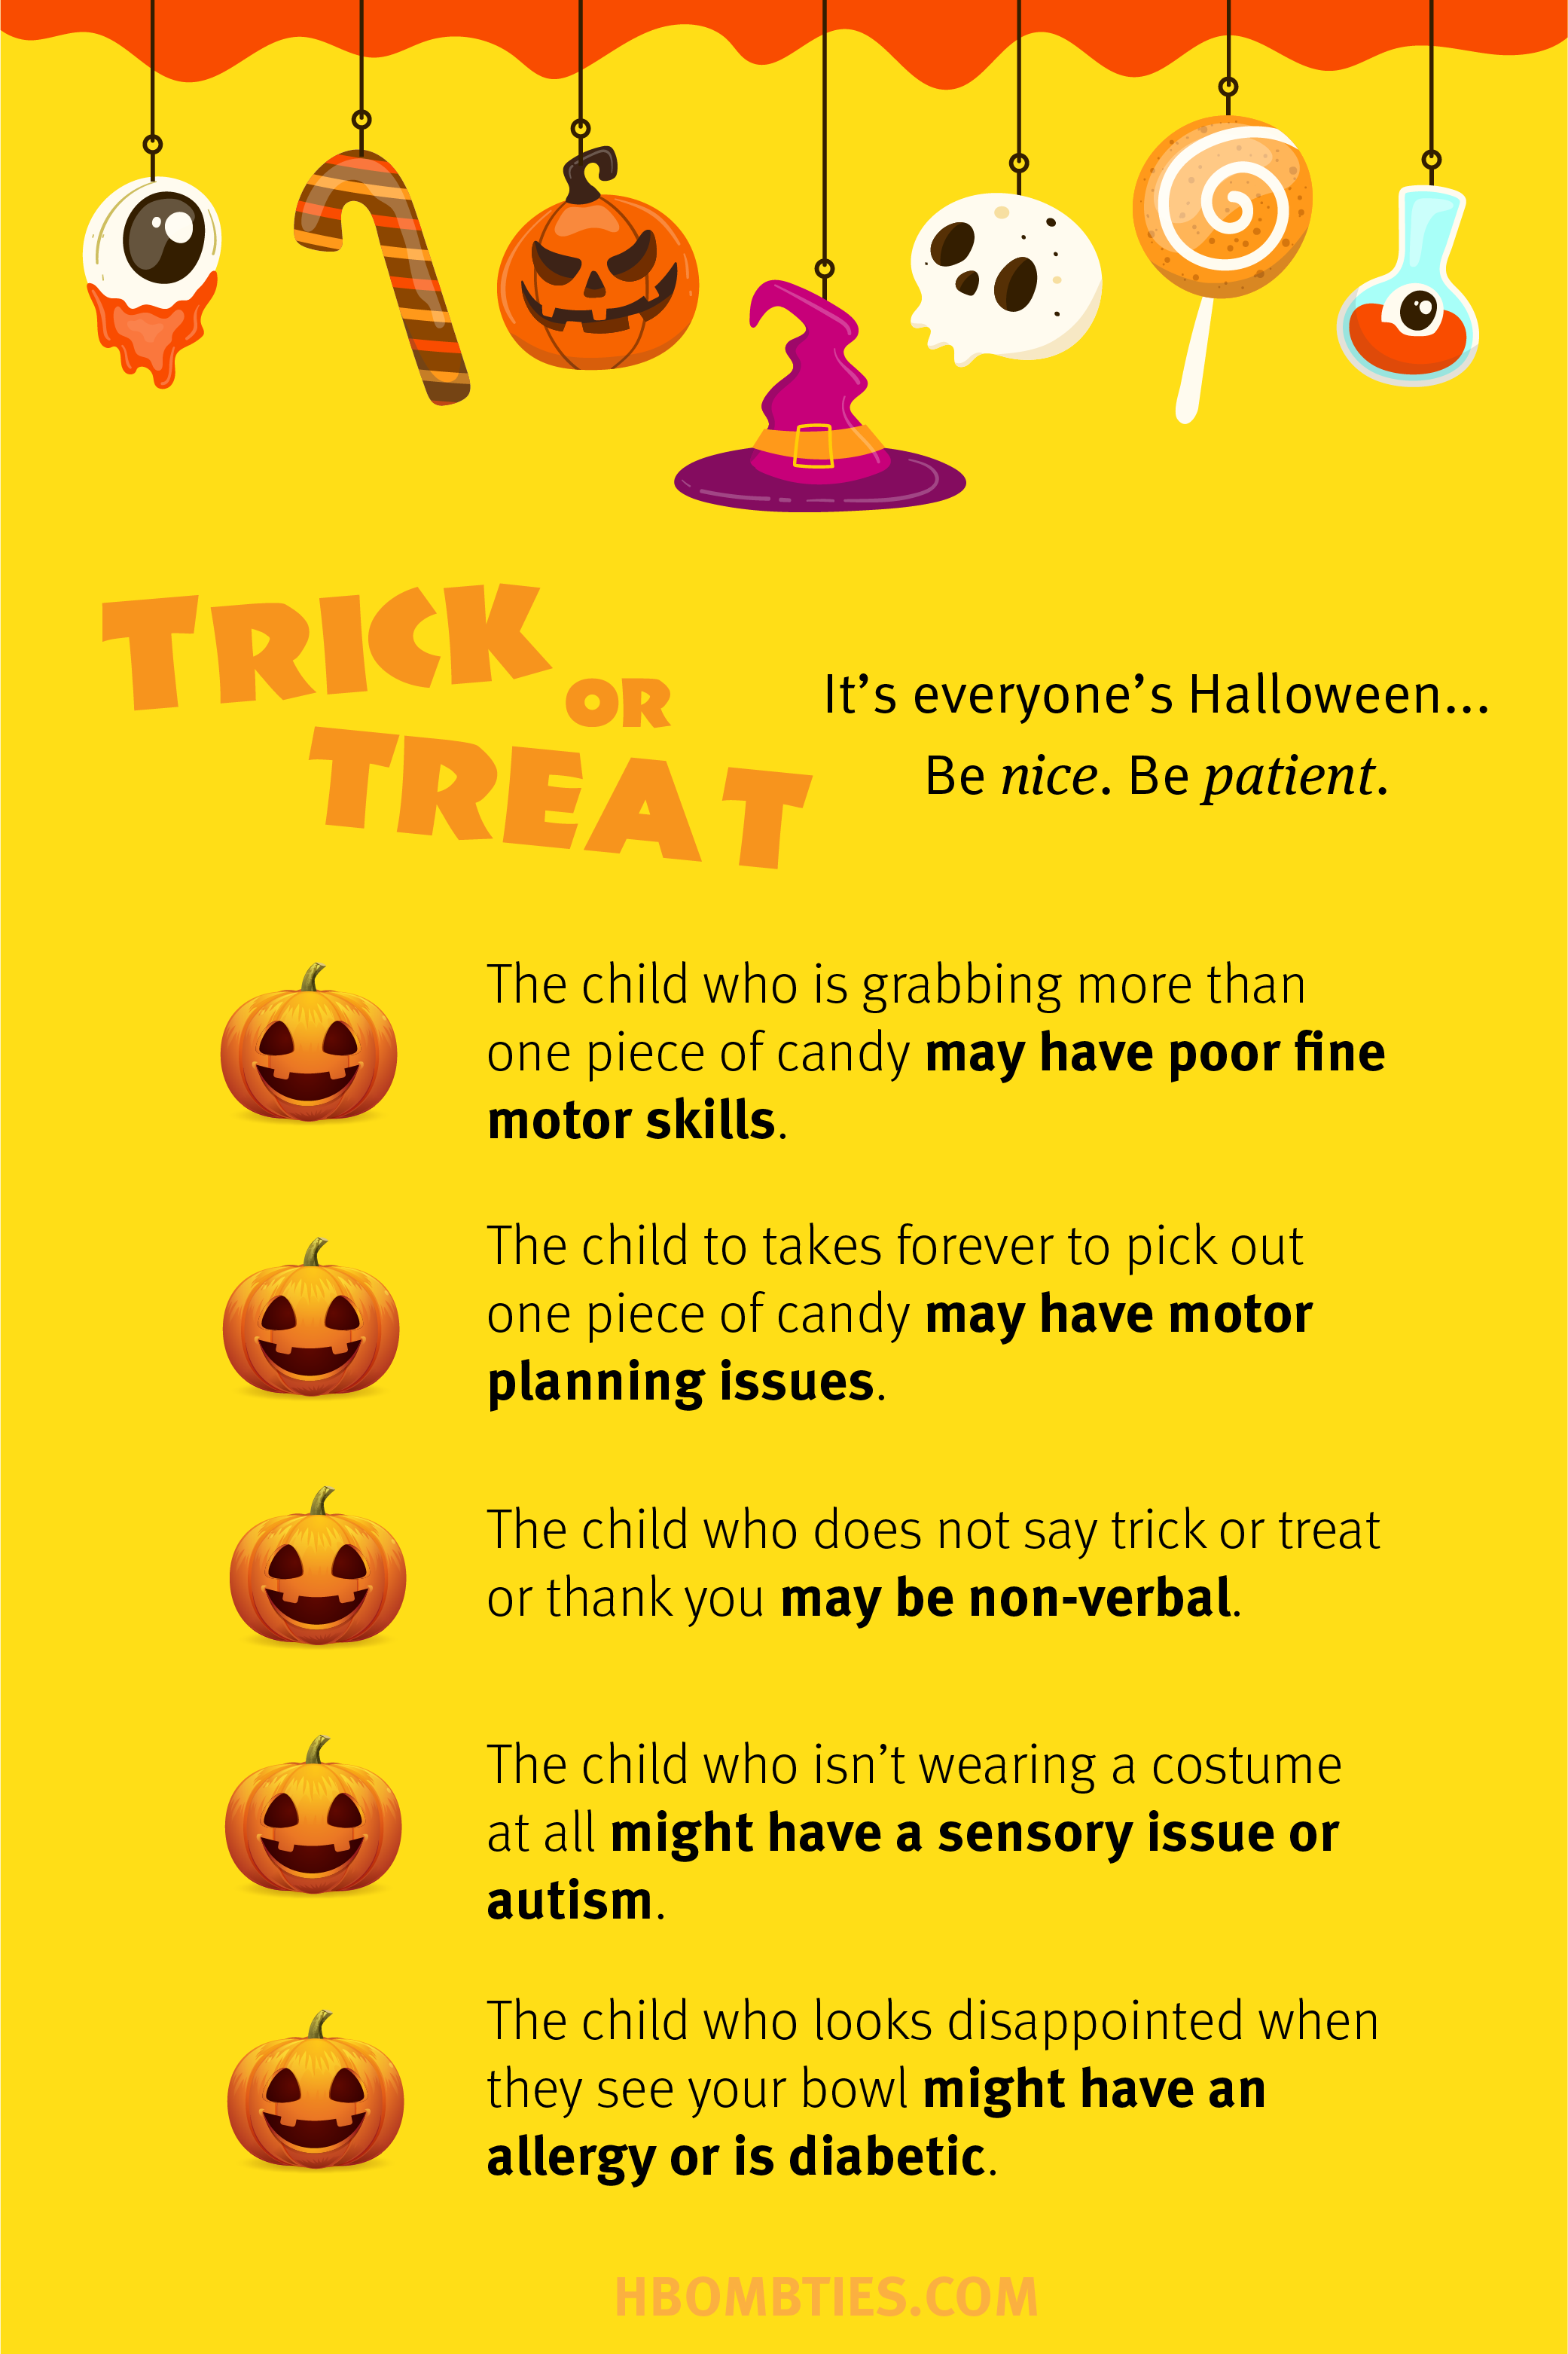 Tips for an accessible and friendly Halloween